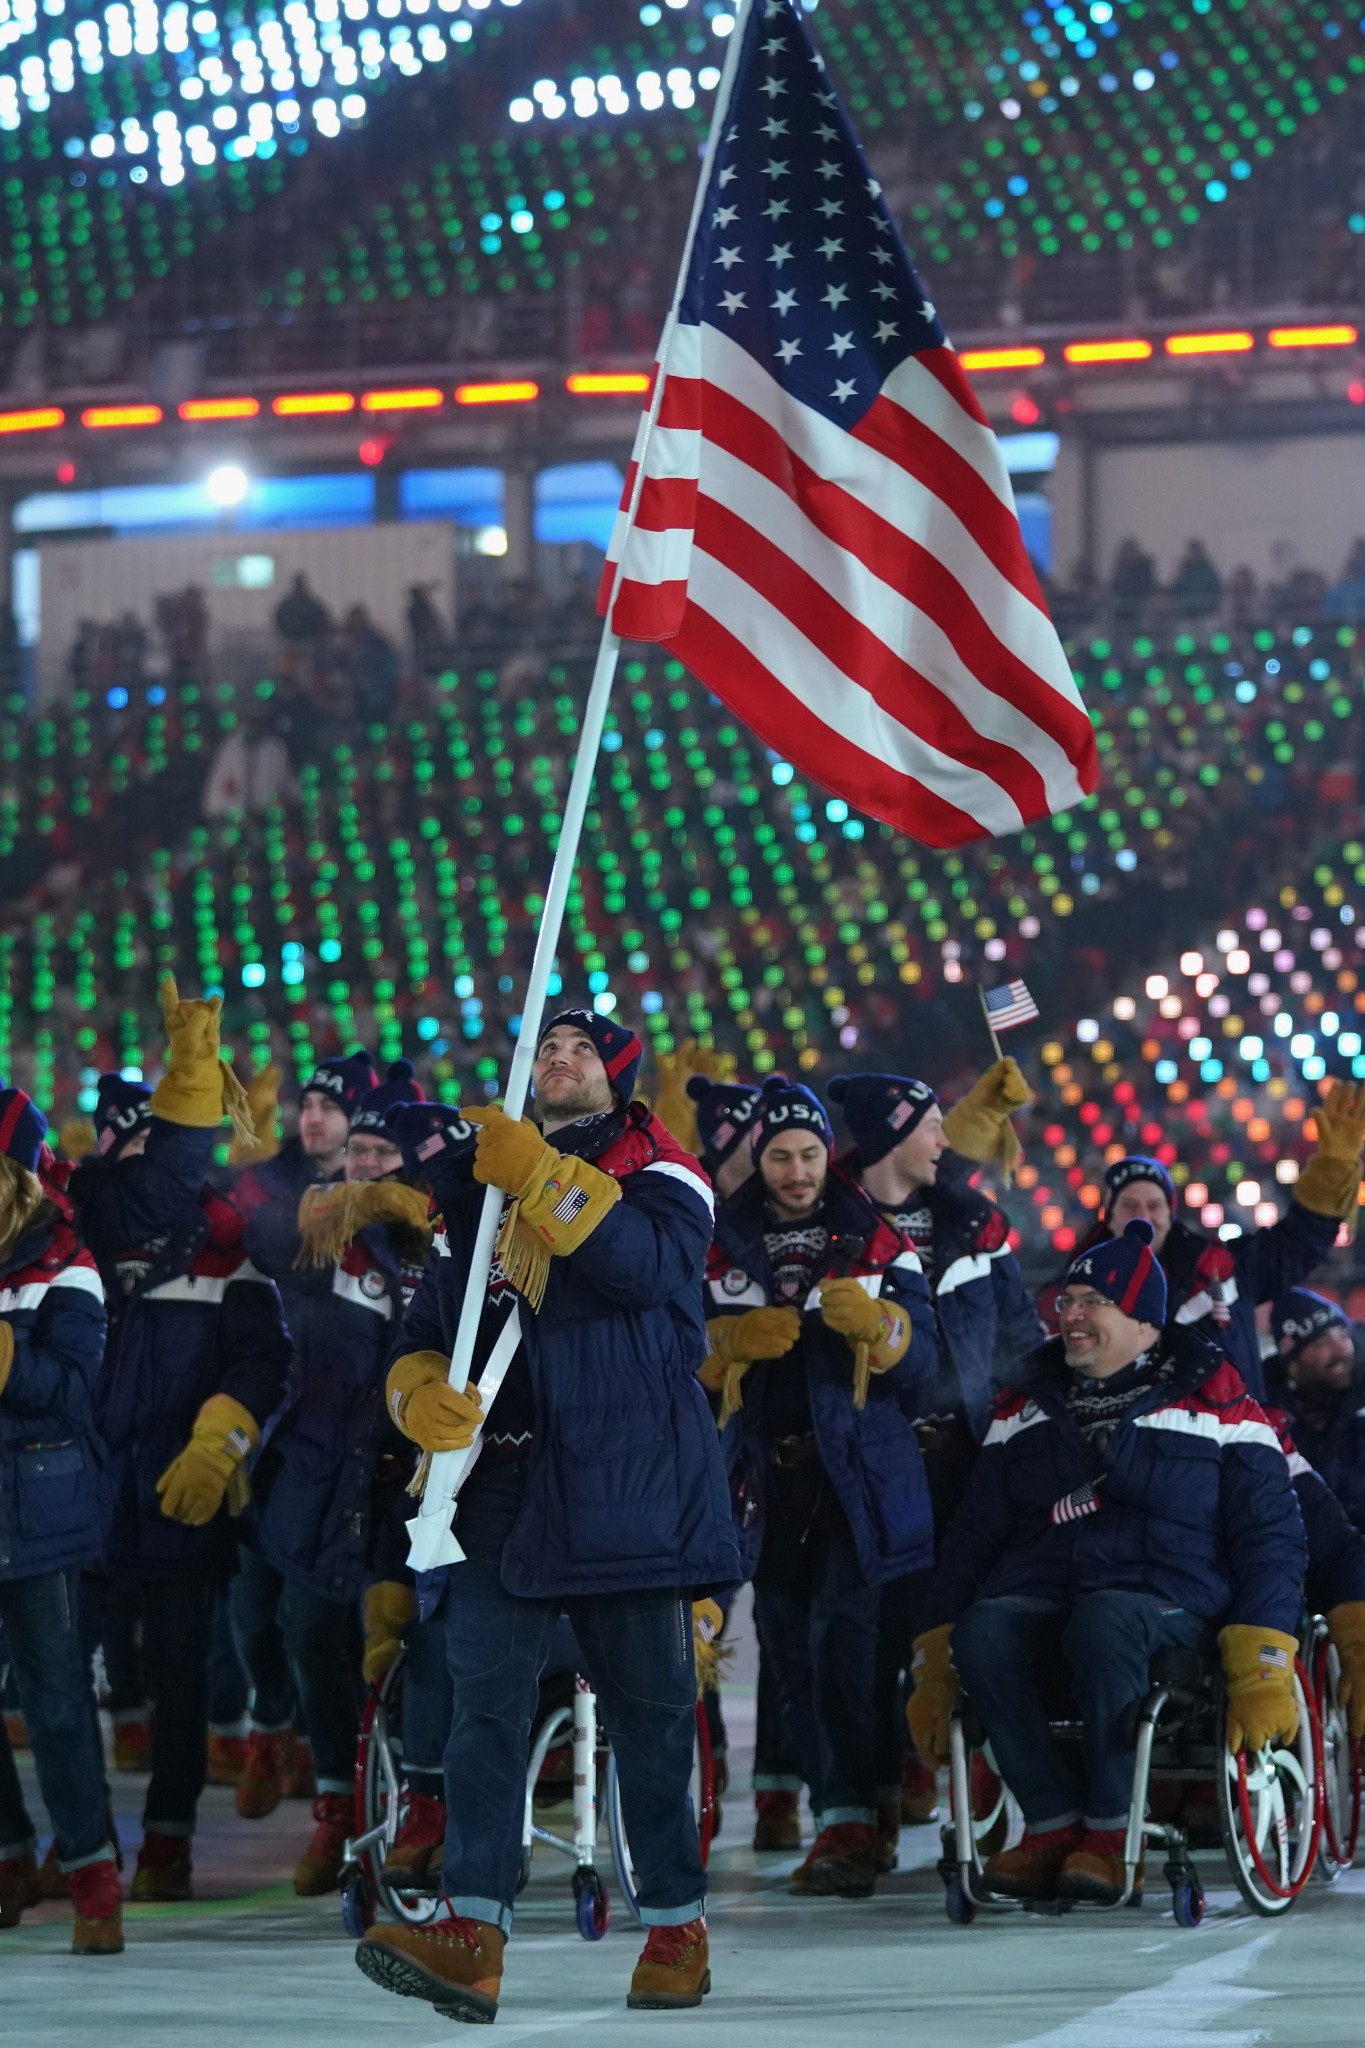 Snowboarder Mike Schultz was selected as the US' flagbearer for the Opening Ceremony of the Games ©Getty Images